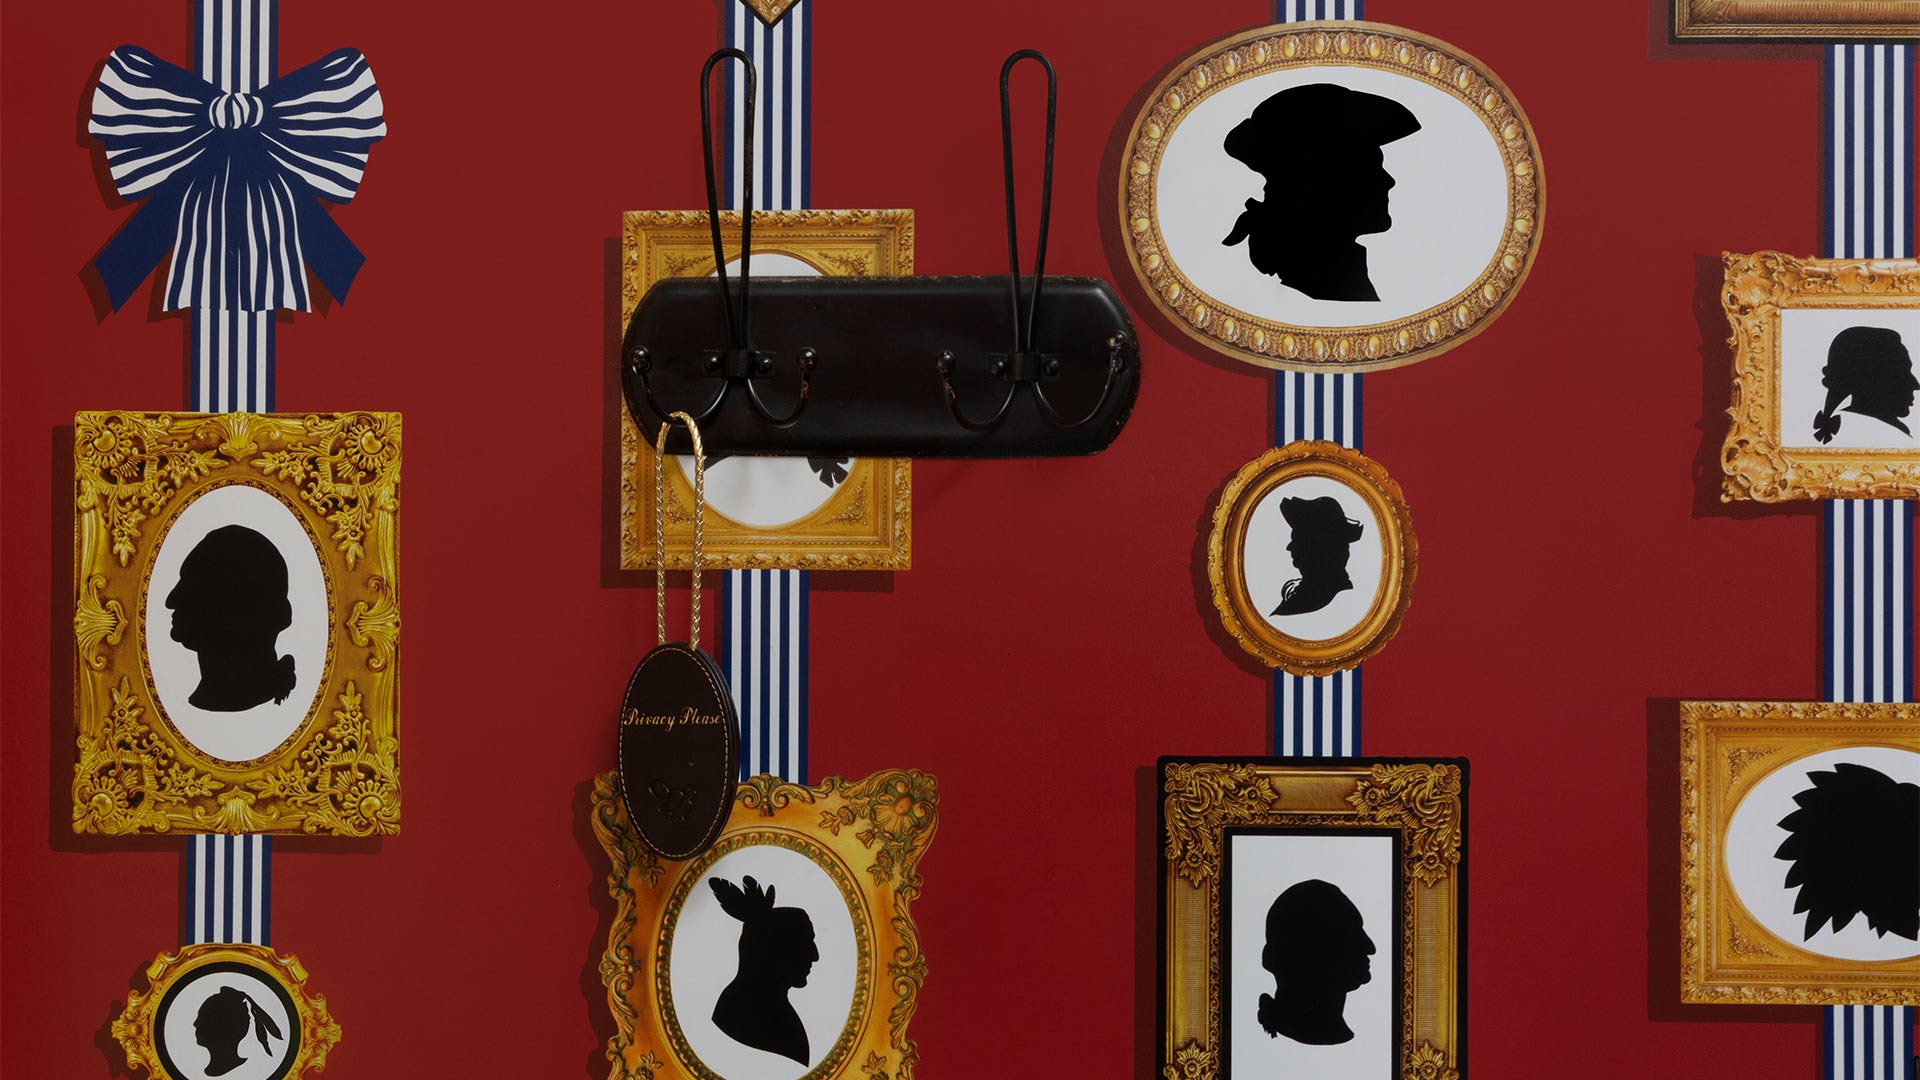 detail shot of a wall. The wall is a deep red color with gold framed pictures of silhouettes of colonial-era people